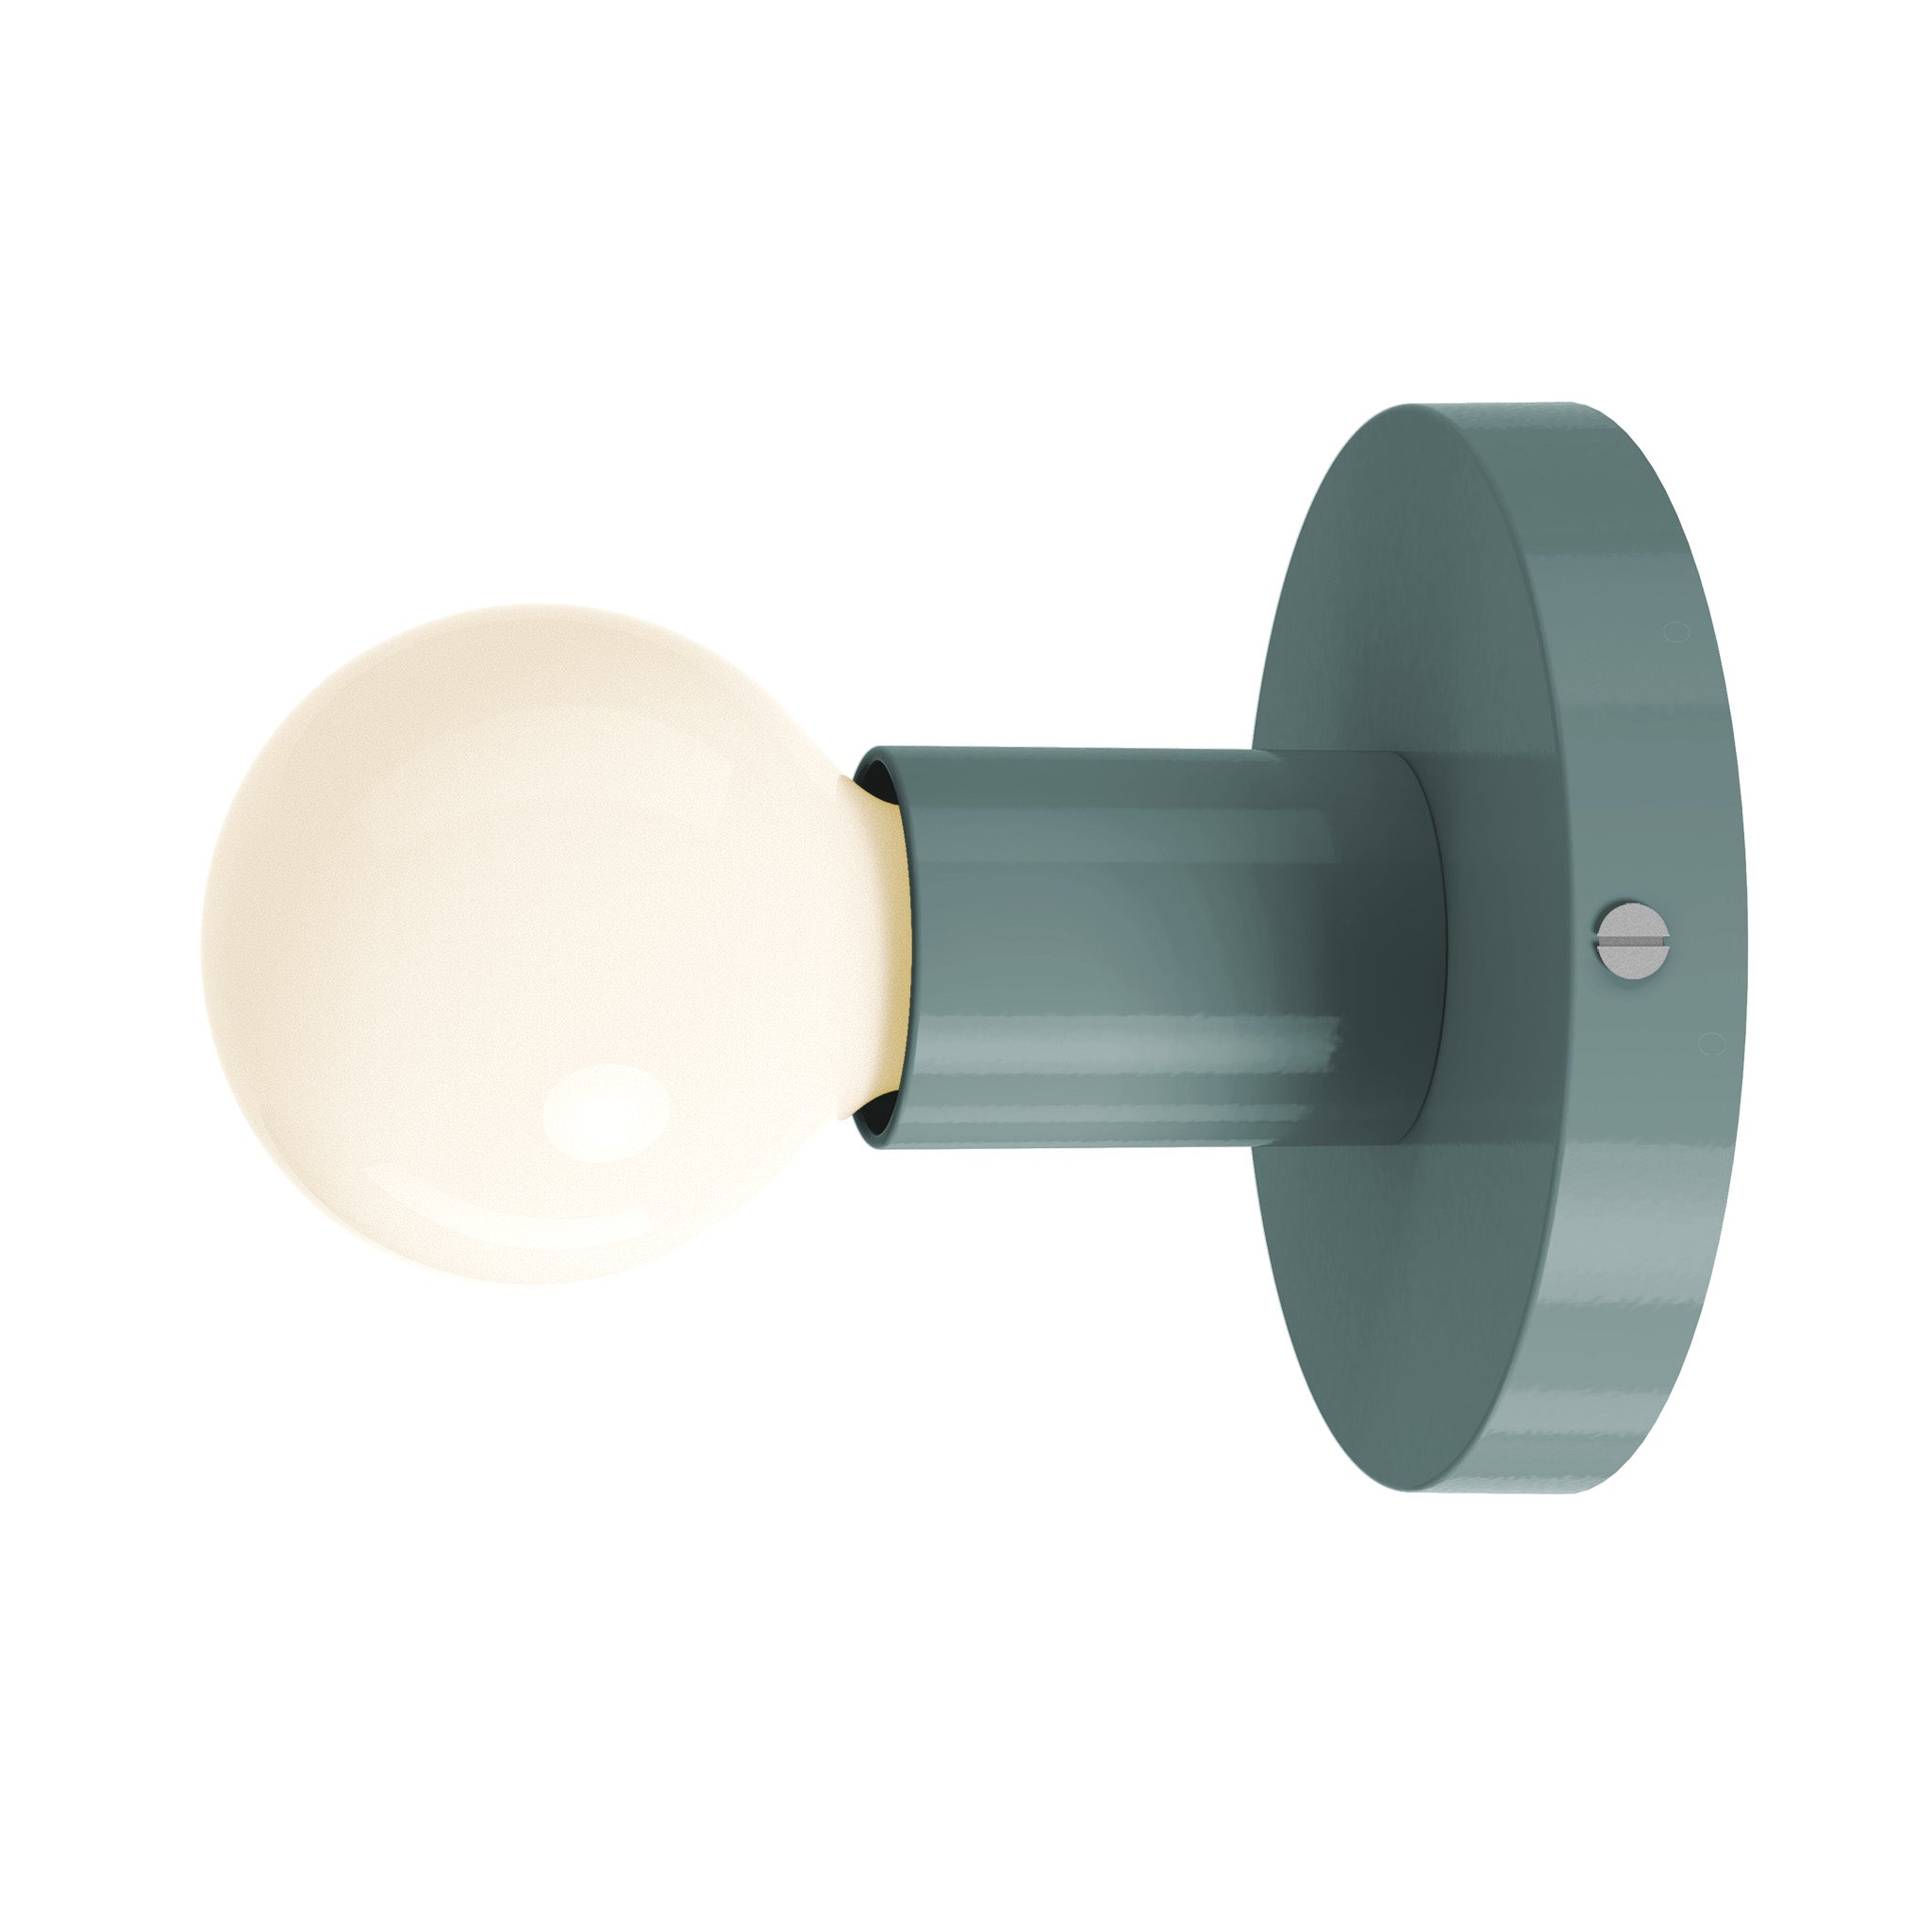 nickel lagoon color twink sconce dutton brown lighting